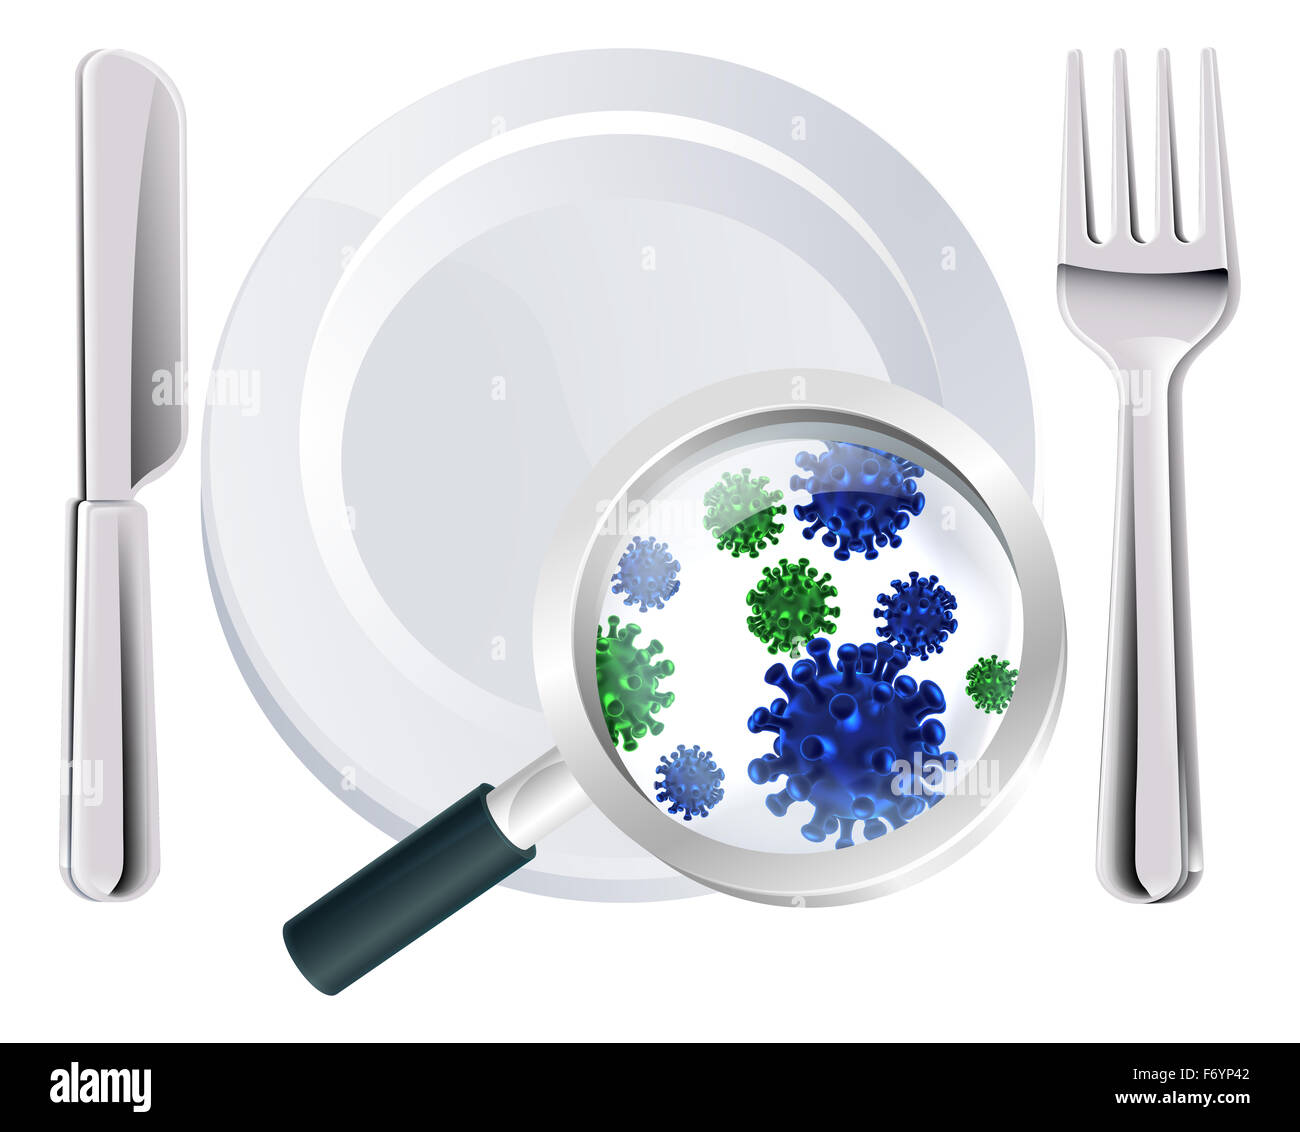 Microscopic bacteria cutlery concept of a plate, knife and fork place setting with a magnifying glass showing microscopic bacter Stock Photo